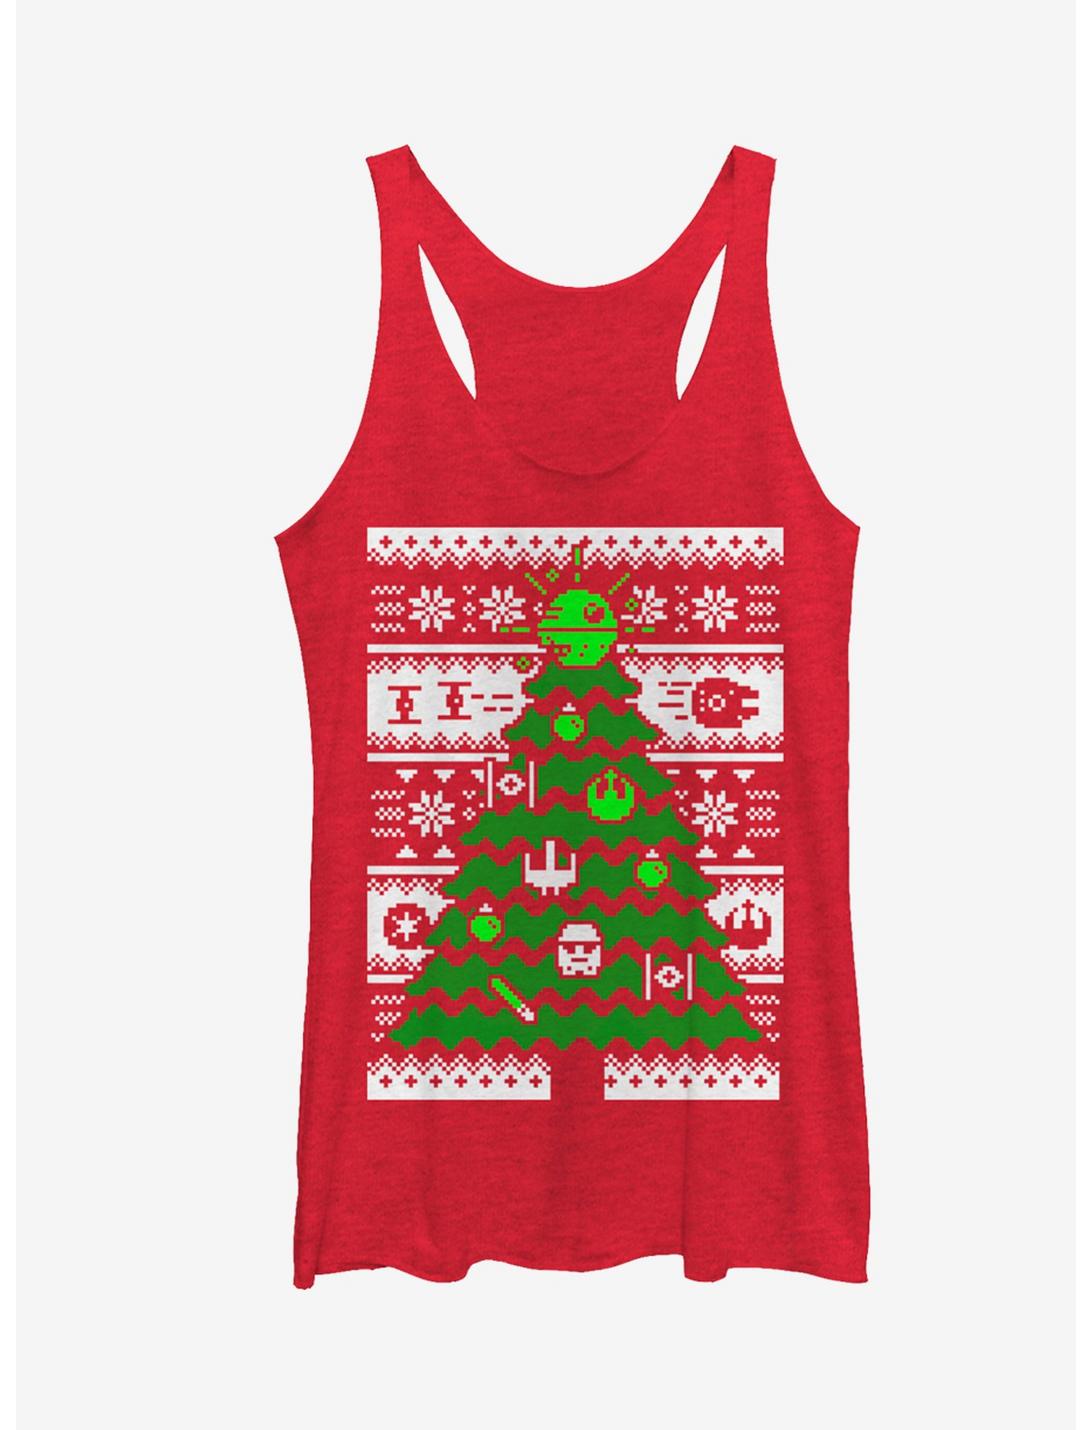 Star Wars Ugly Christmas Sweater Tree Girls Tanks, RED HTR, hi-res